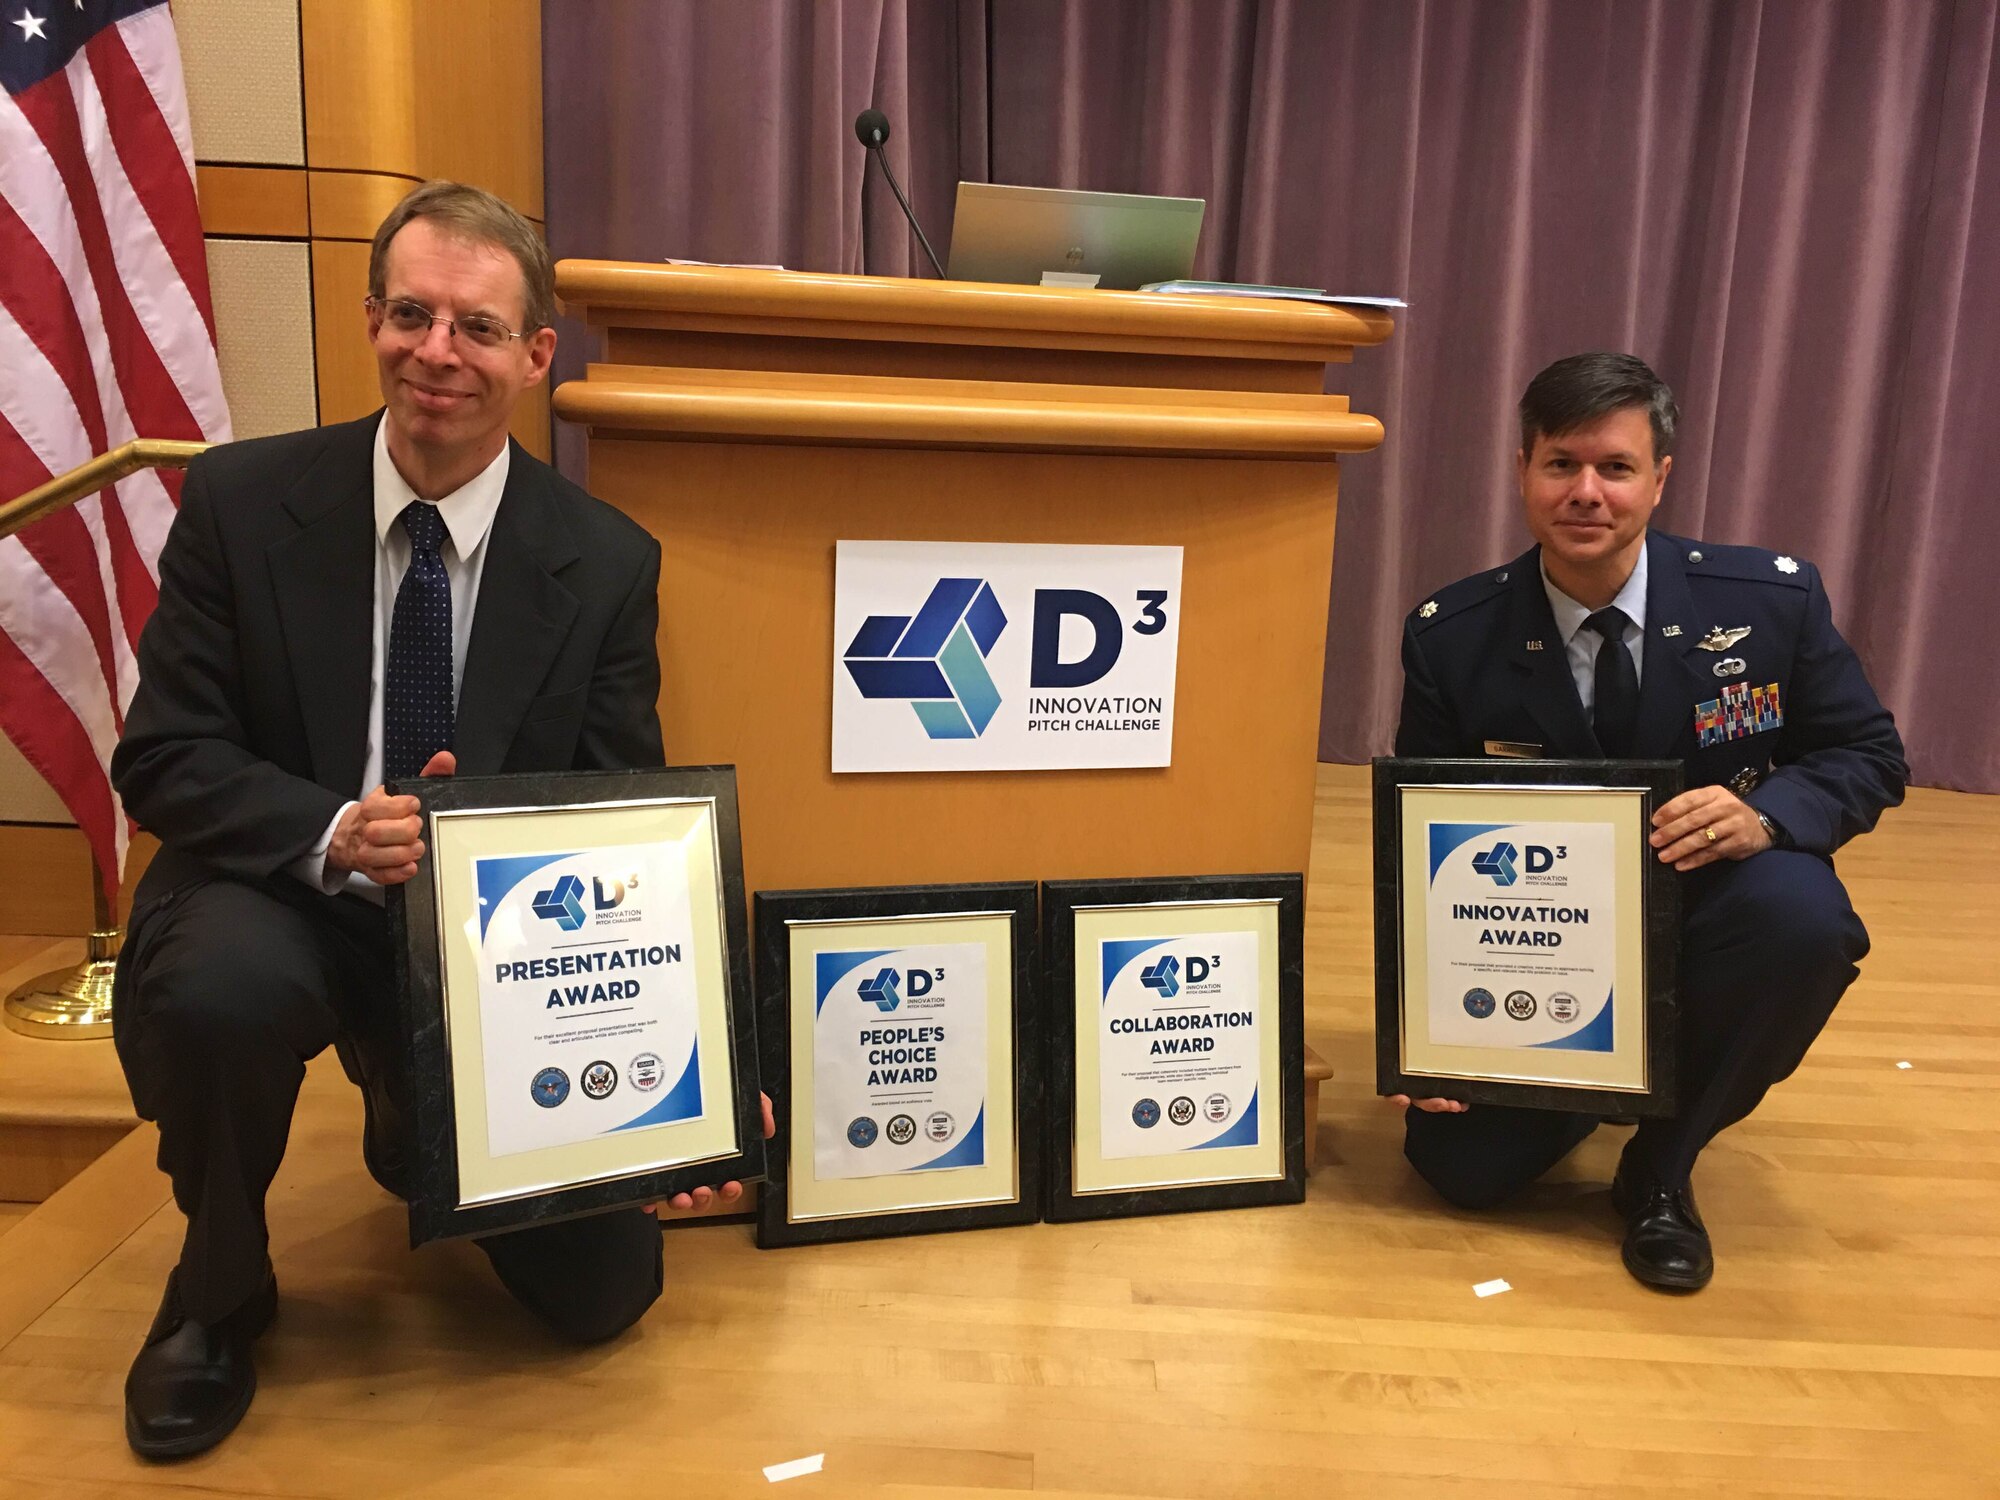 Dr. Paul Jaffe and Lt. Col. Peter Garretson pose with the awards their Space Solar Power D3 team won at inaugural Defense, Diplomacy and Development Innovation Summit Pitch Challenge, March 3 in Washington, D.C. The space solar power D3 team includes members of the Air University, the Naval Research Lab, Northrop Grumman, NASA, the Join Staff Logistics and Energy division, DARPA, the United States Army, and the Space Development Steering Committee. (Courtesy photo)